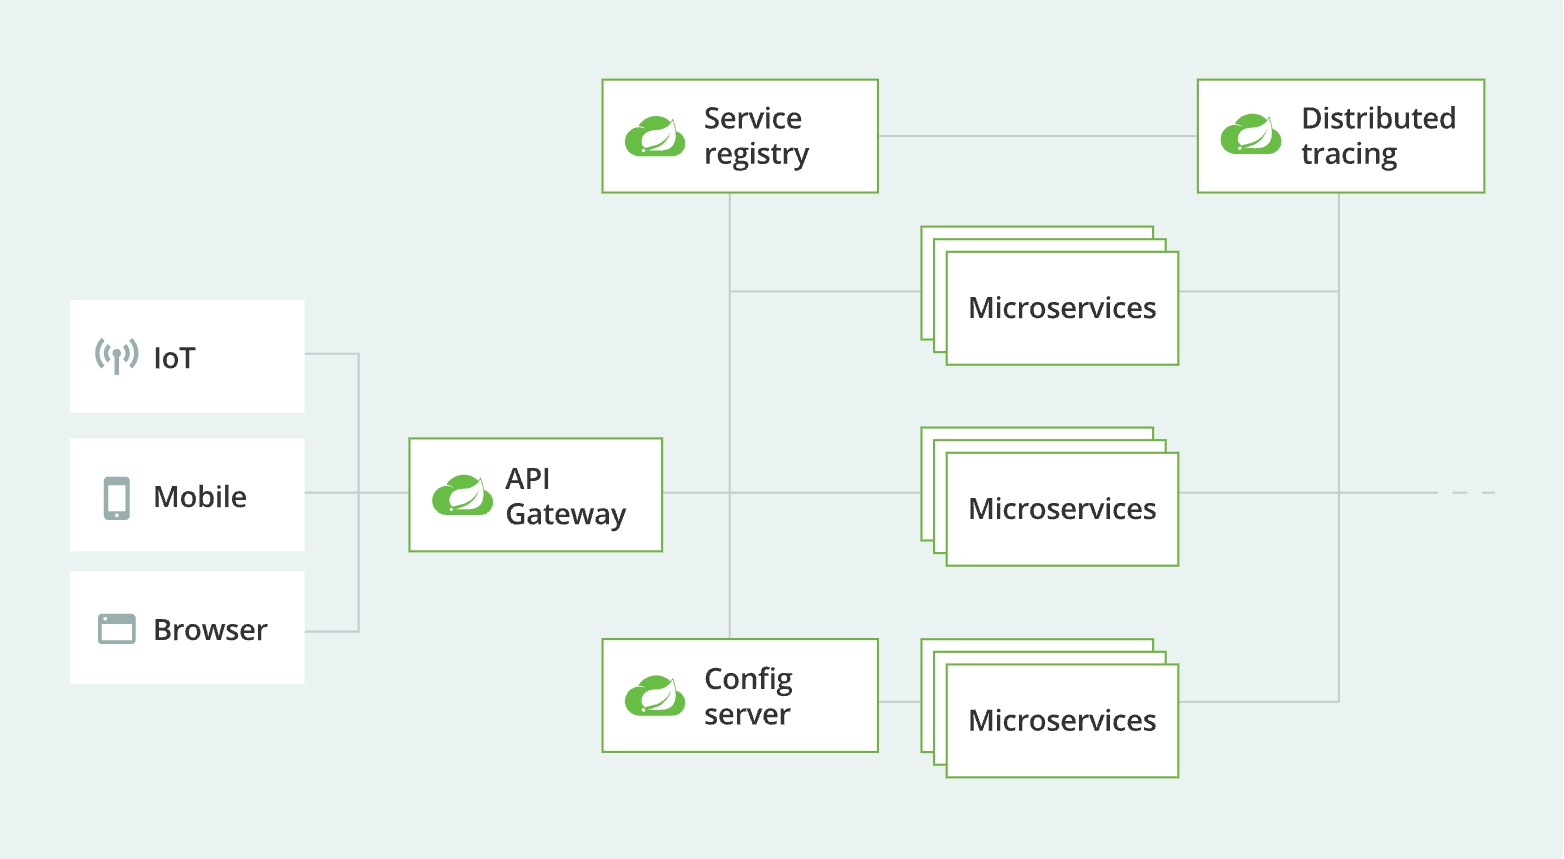 Spring Cloud architecture highlights